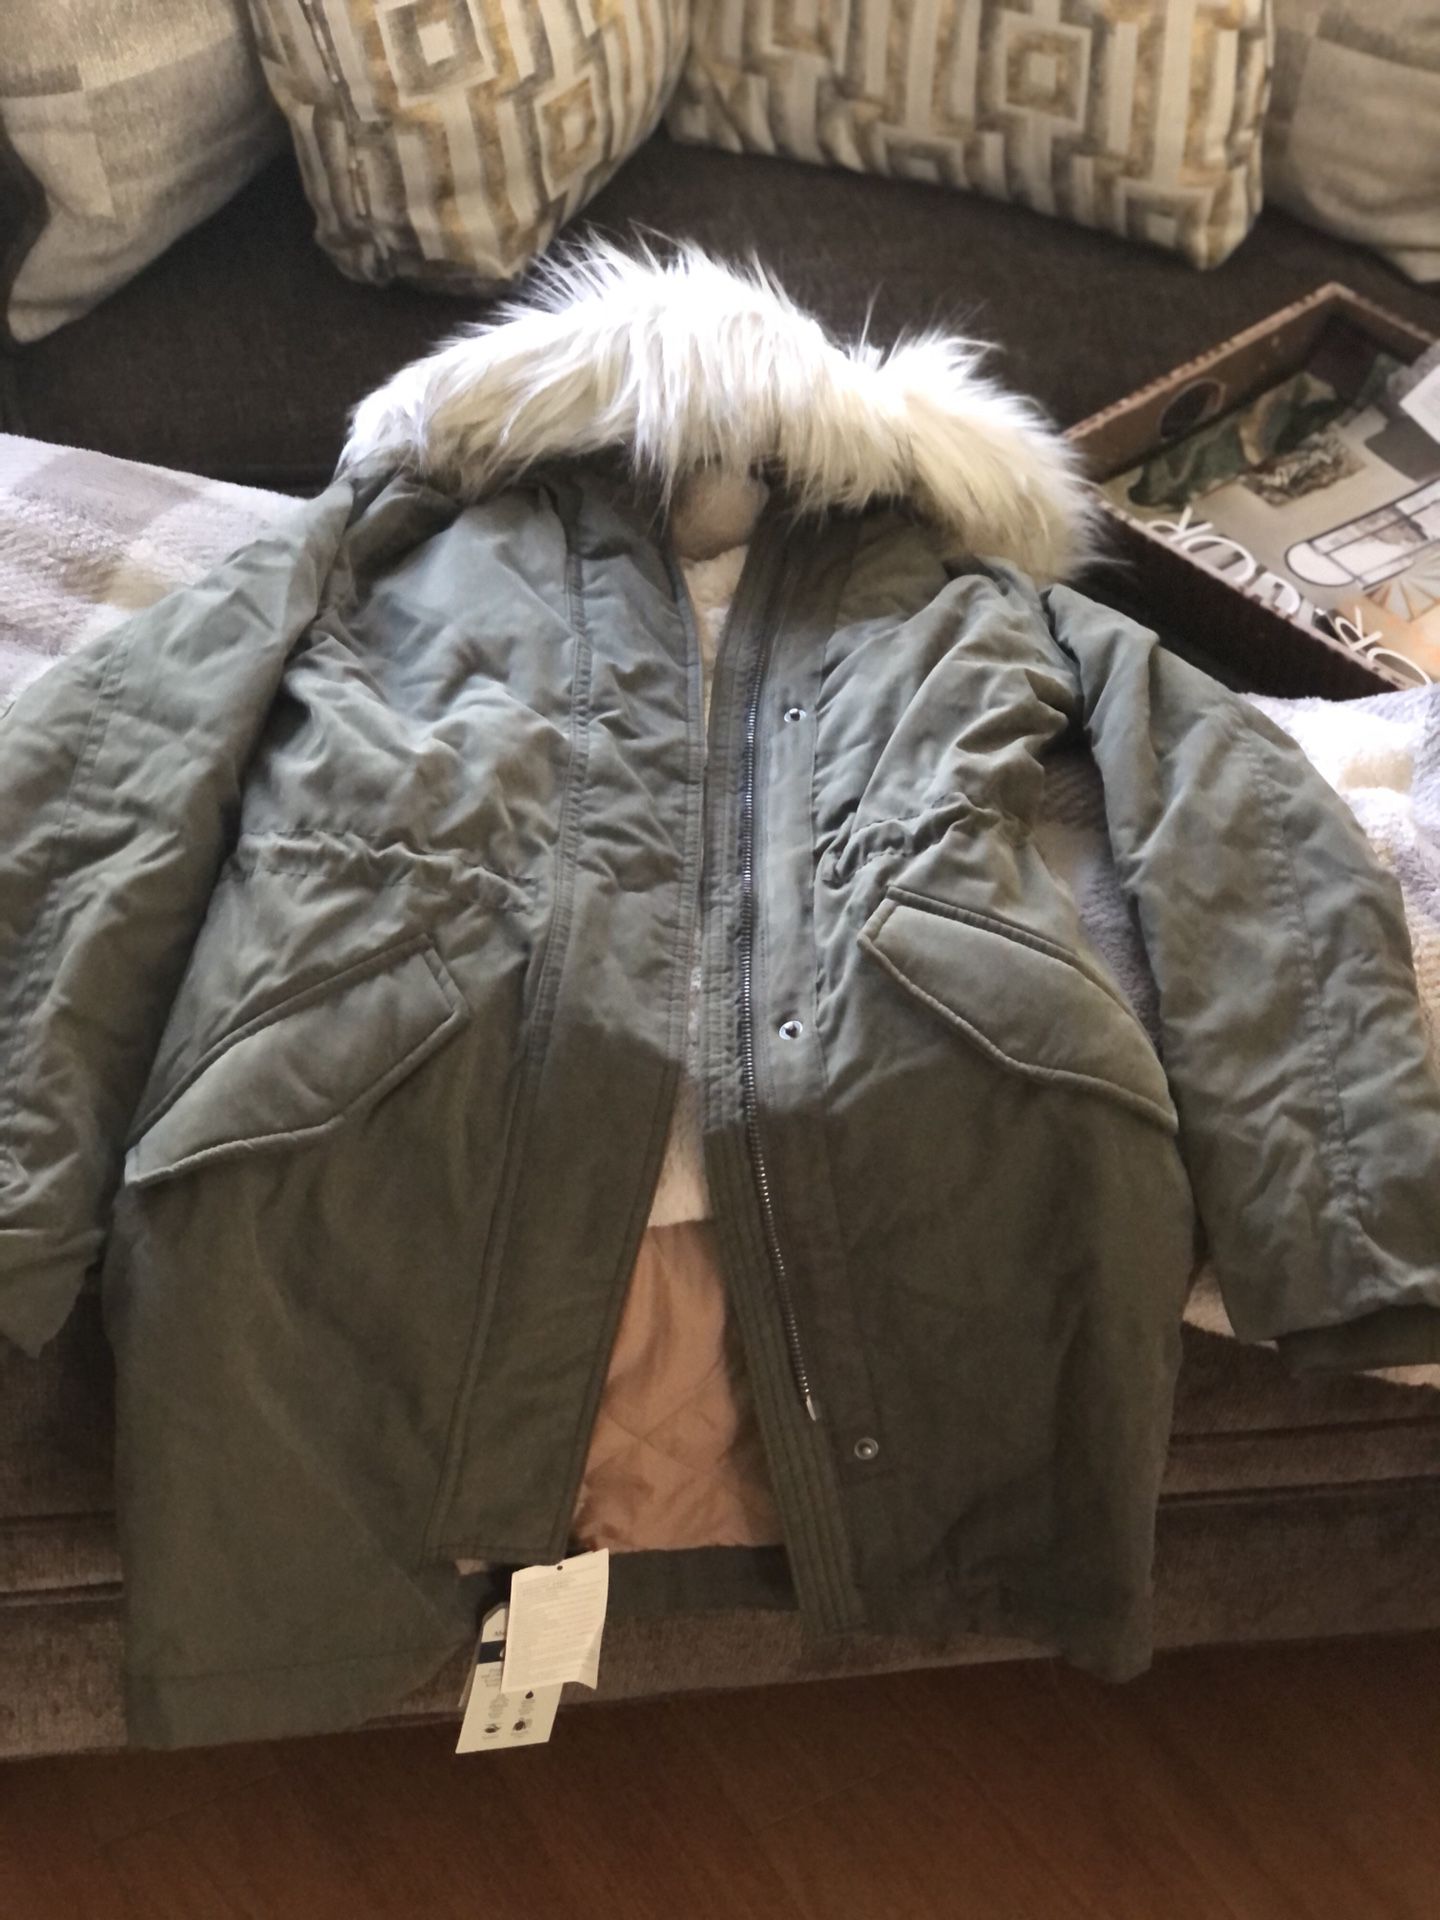 Abercrombie & Fitch Lady’s Coat🧥